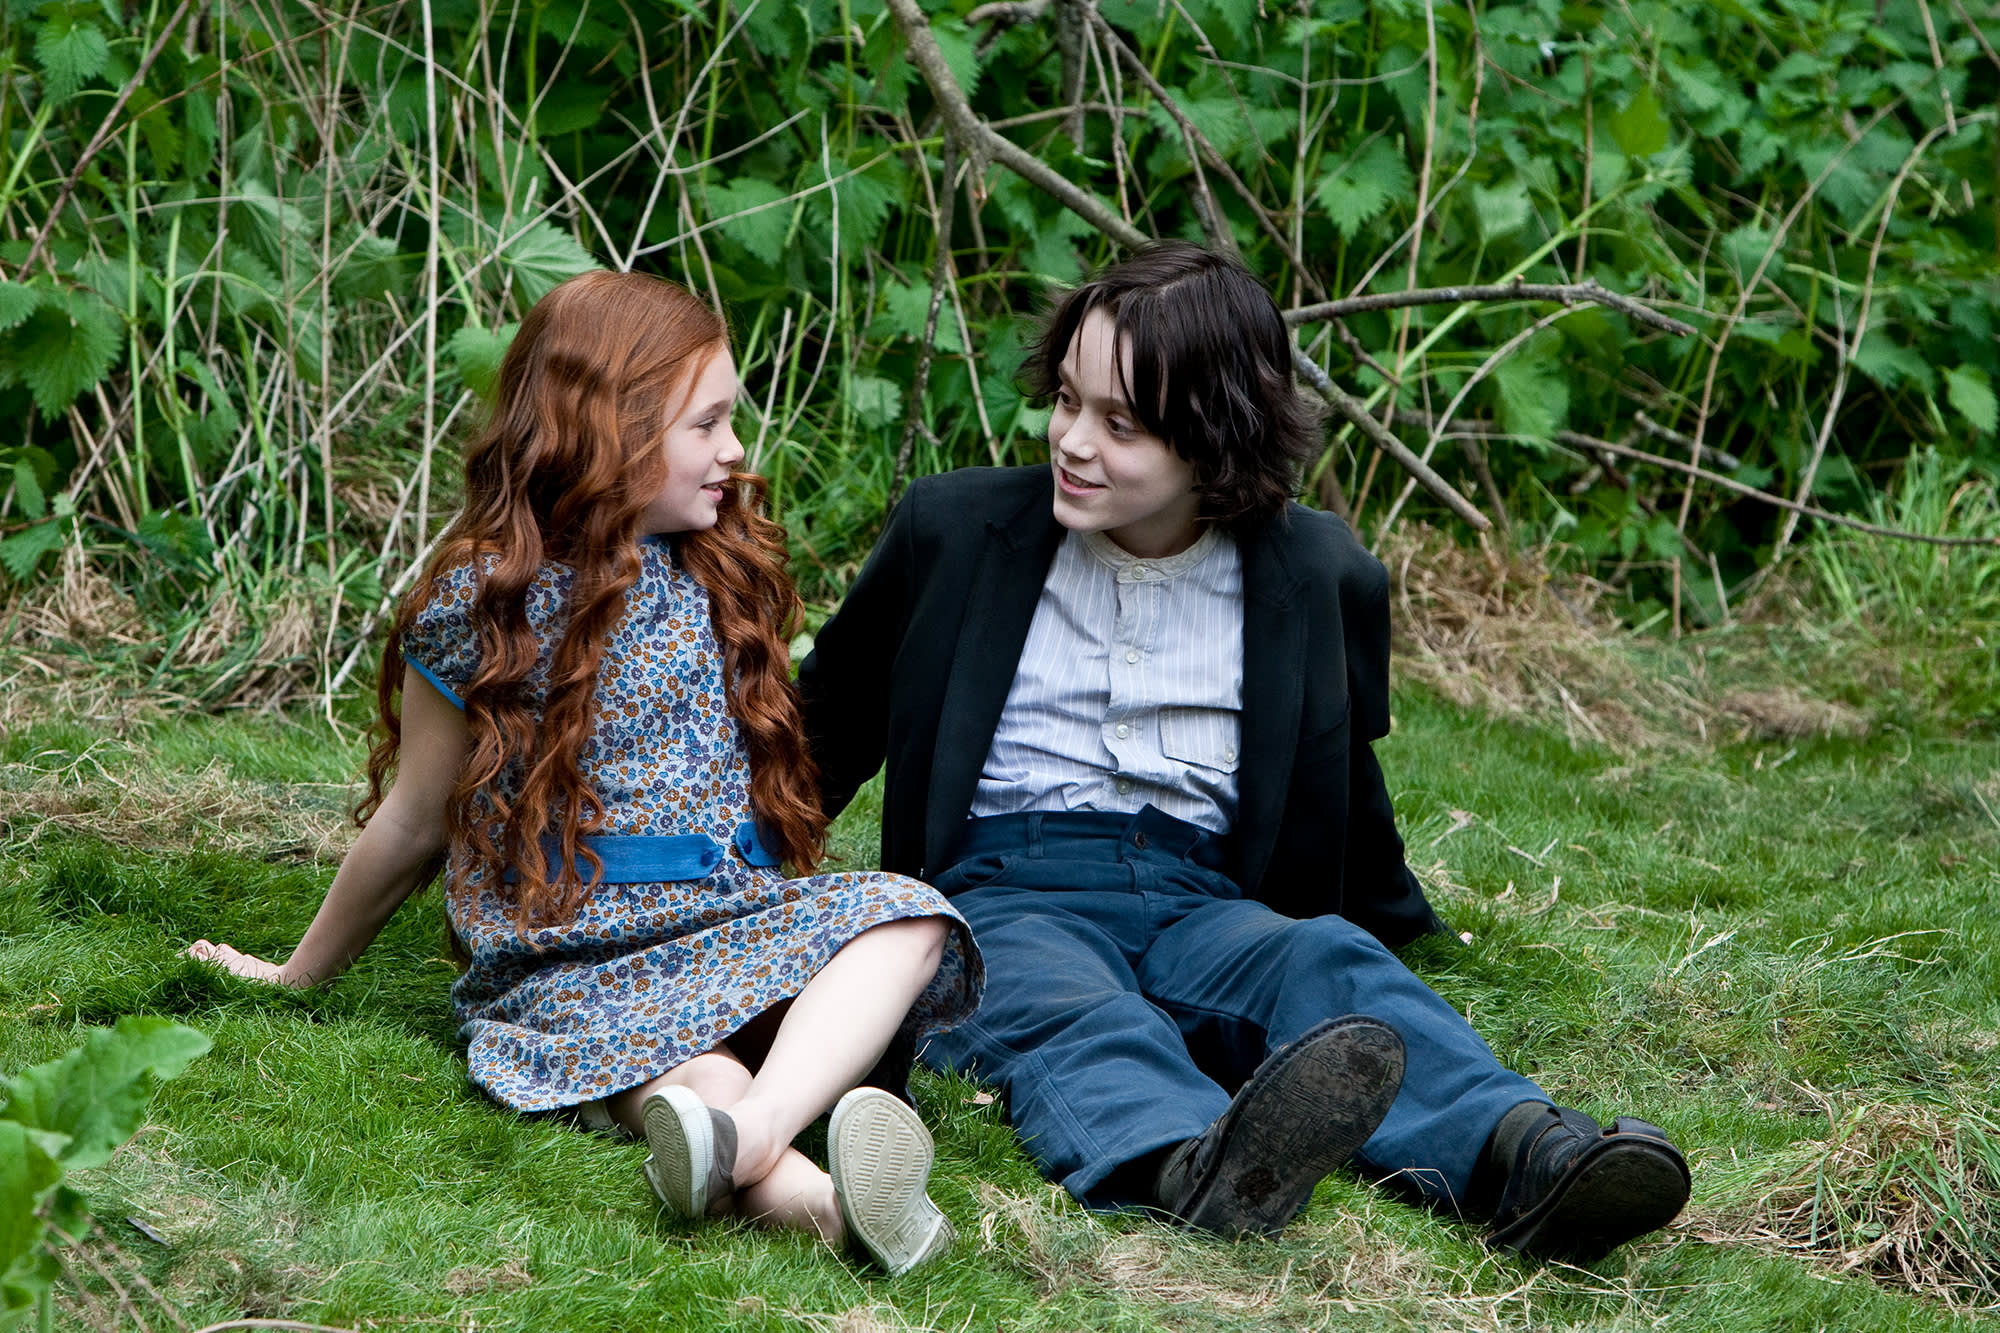 HP-F8-deathly-hallows-part-2-snape-lily-sitting-happy-grass-web-landscape